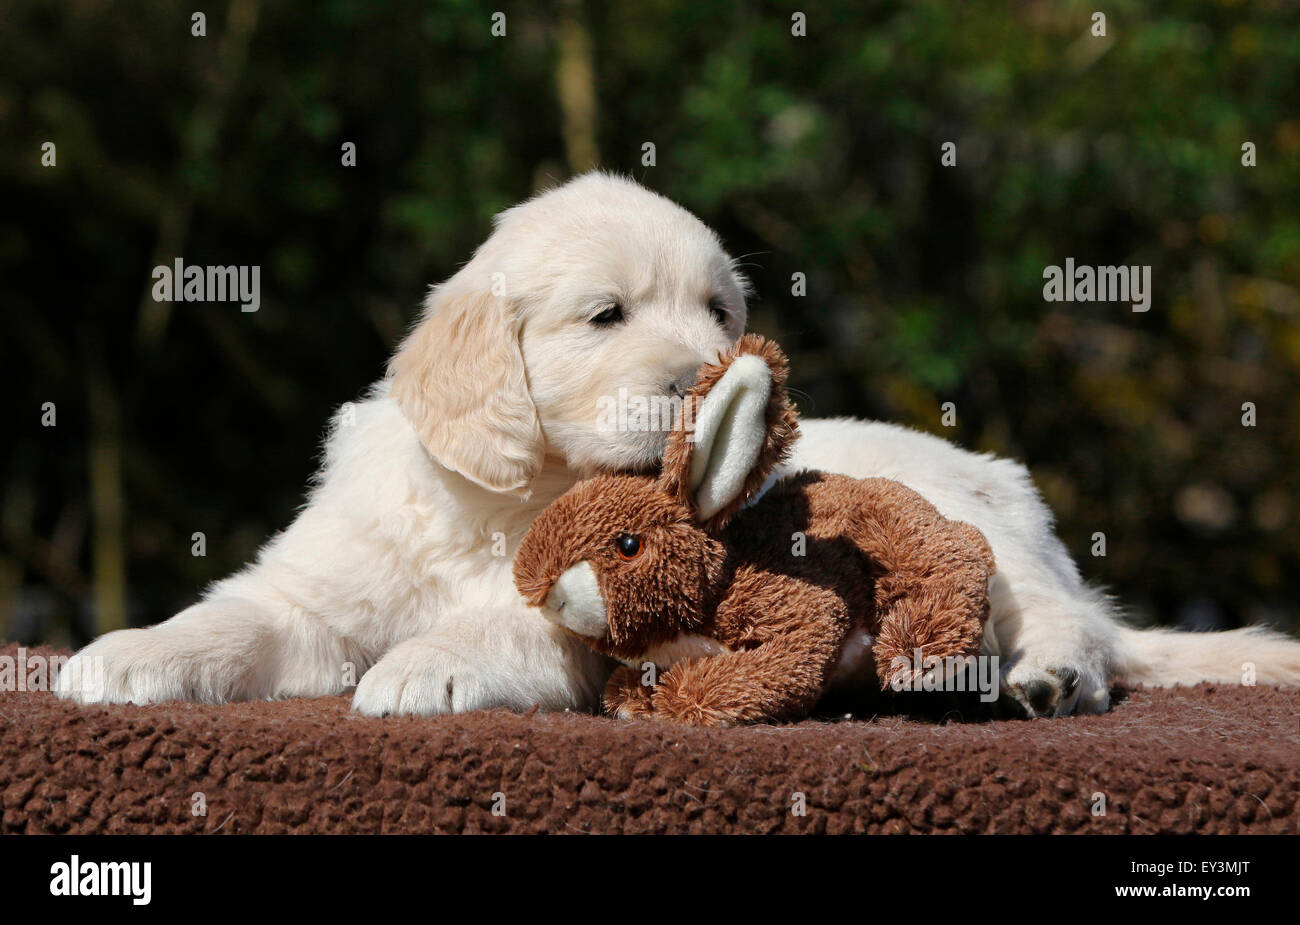 Golden Retriever. Puppy Lino (8 weeks old) lying next to a toy rabbit. Germany Stock Photo